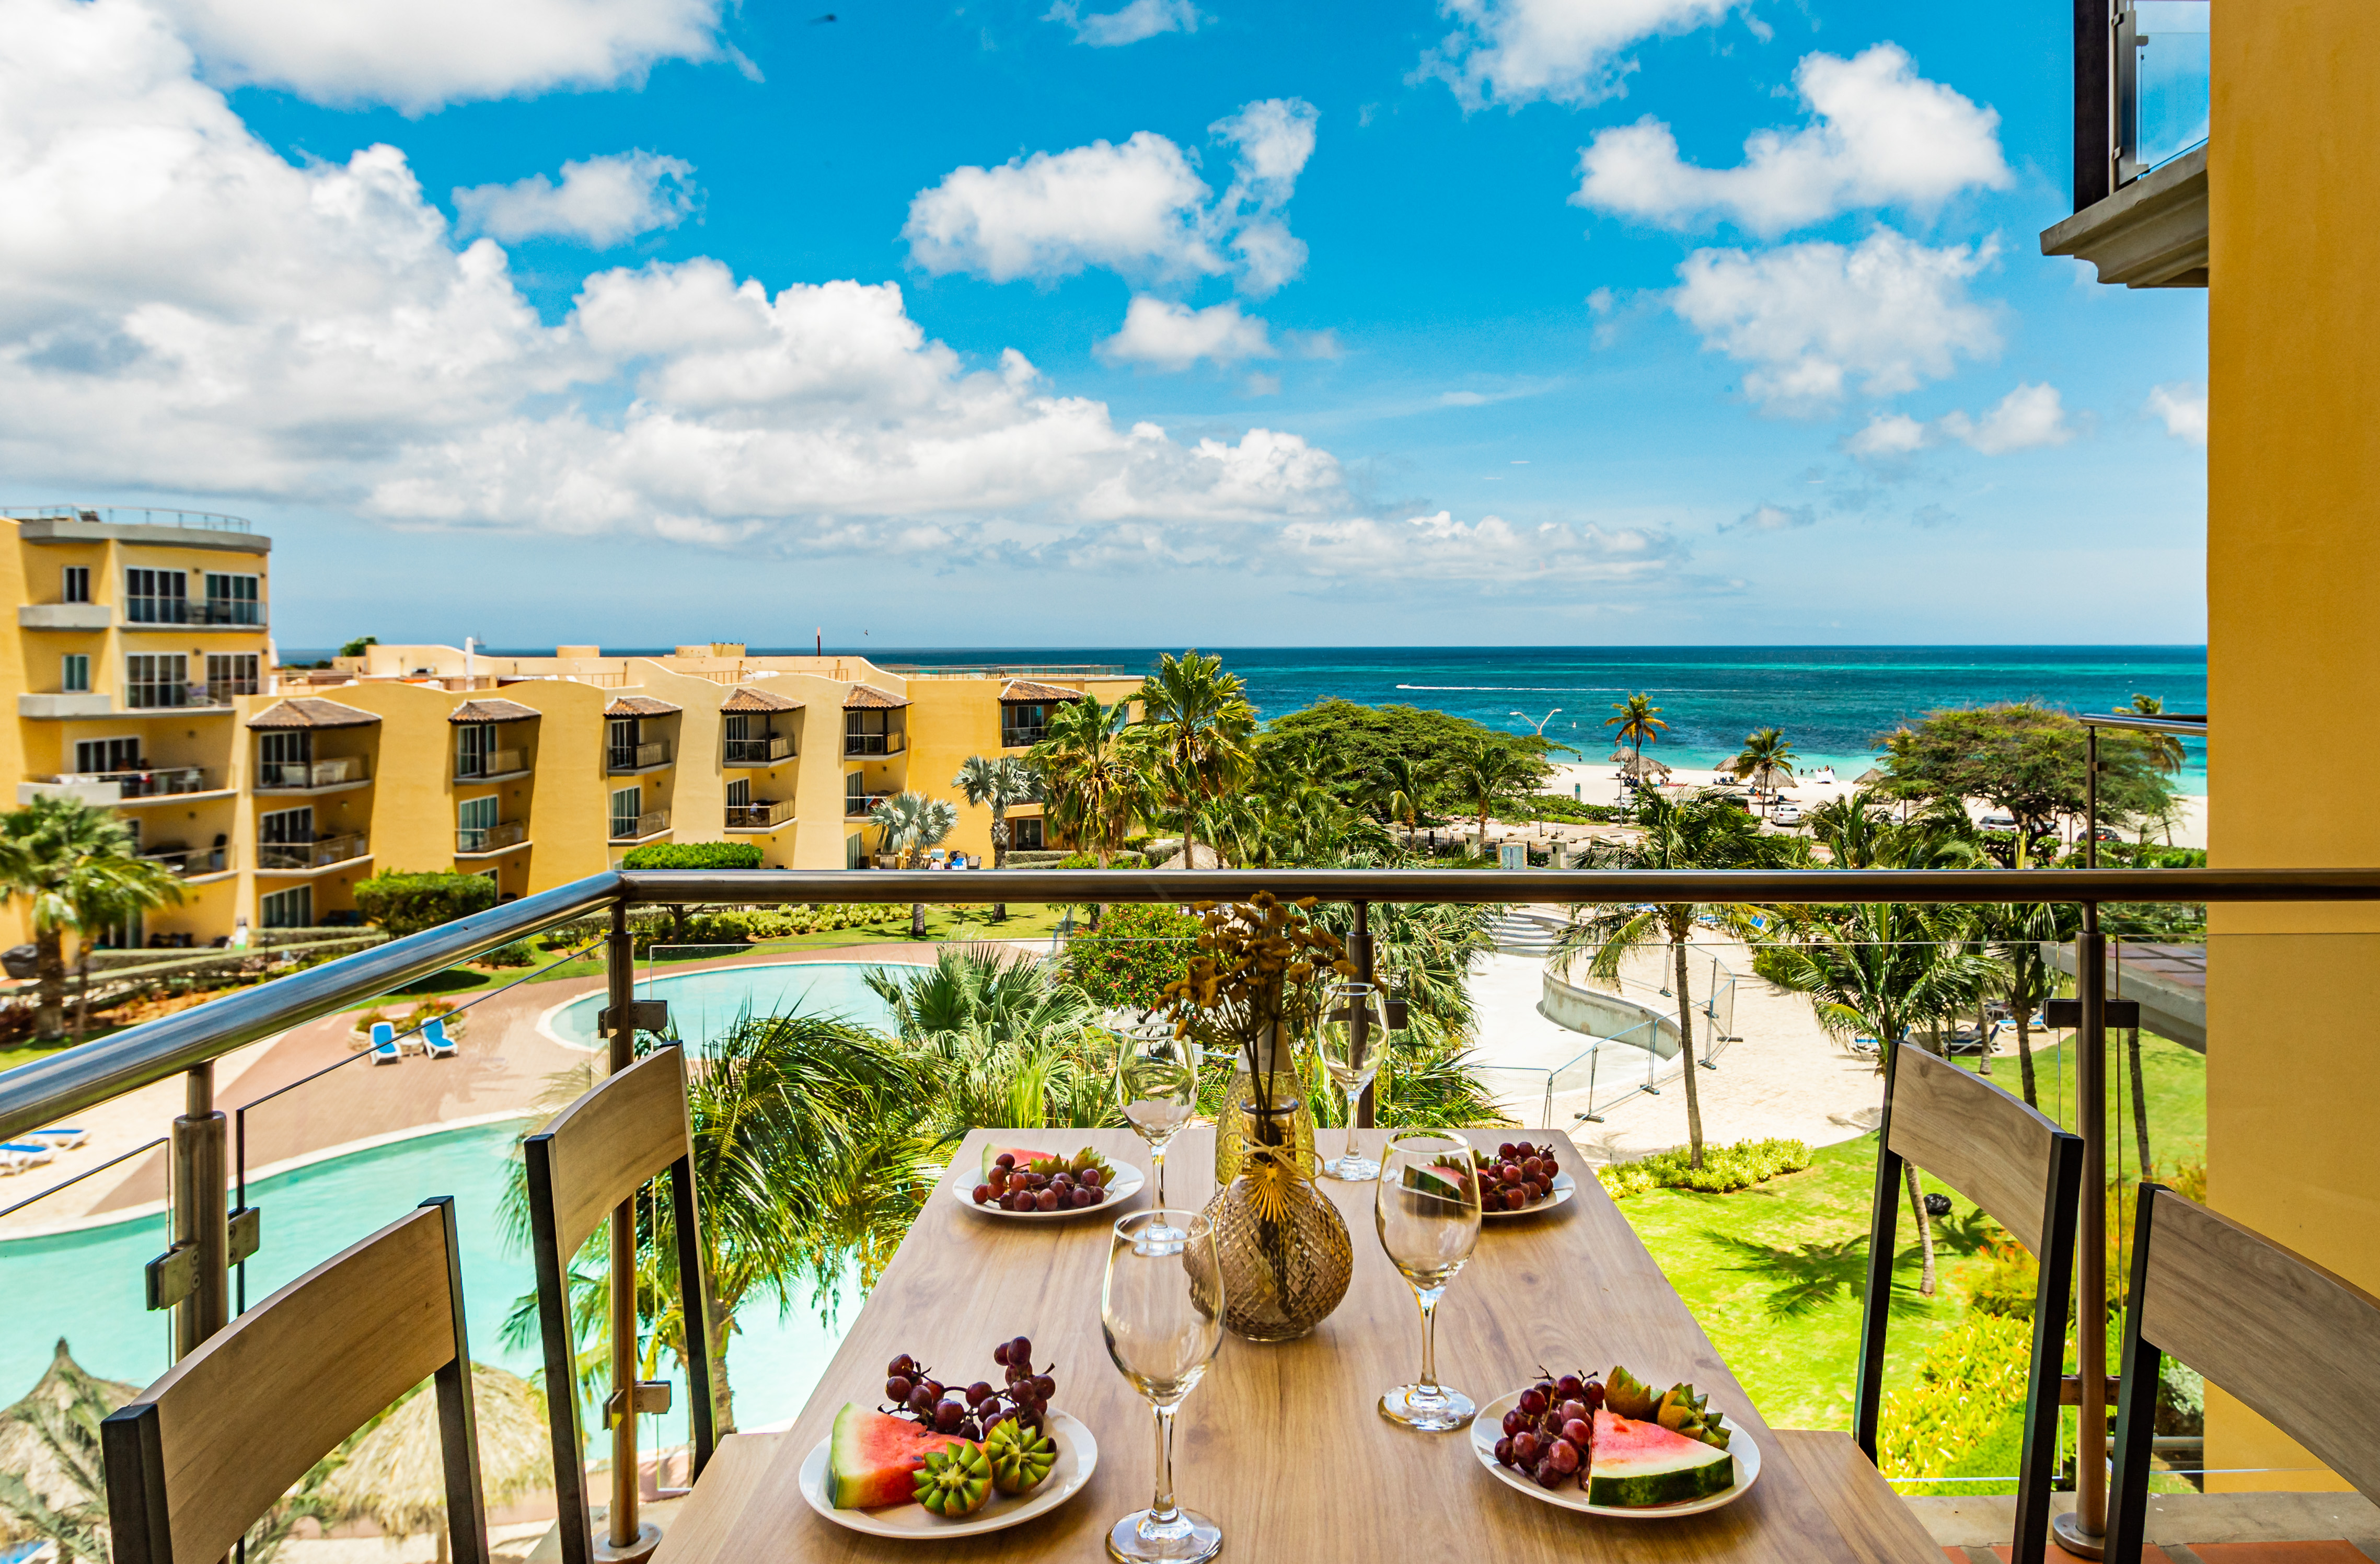 Opulent Balcony of the Apartment in Aruba with ocean views - Scenic private balcony for relaxation - Dining for 4 persons - Access to outdoor beauty from the comfort of home